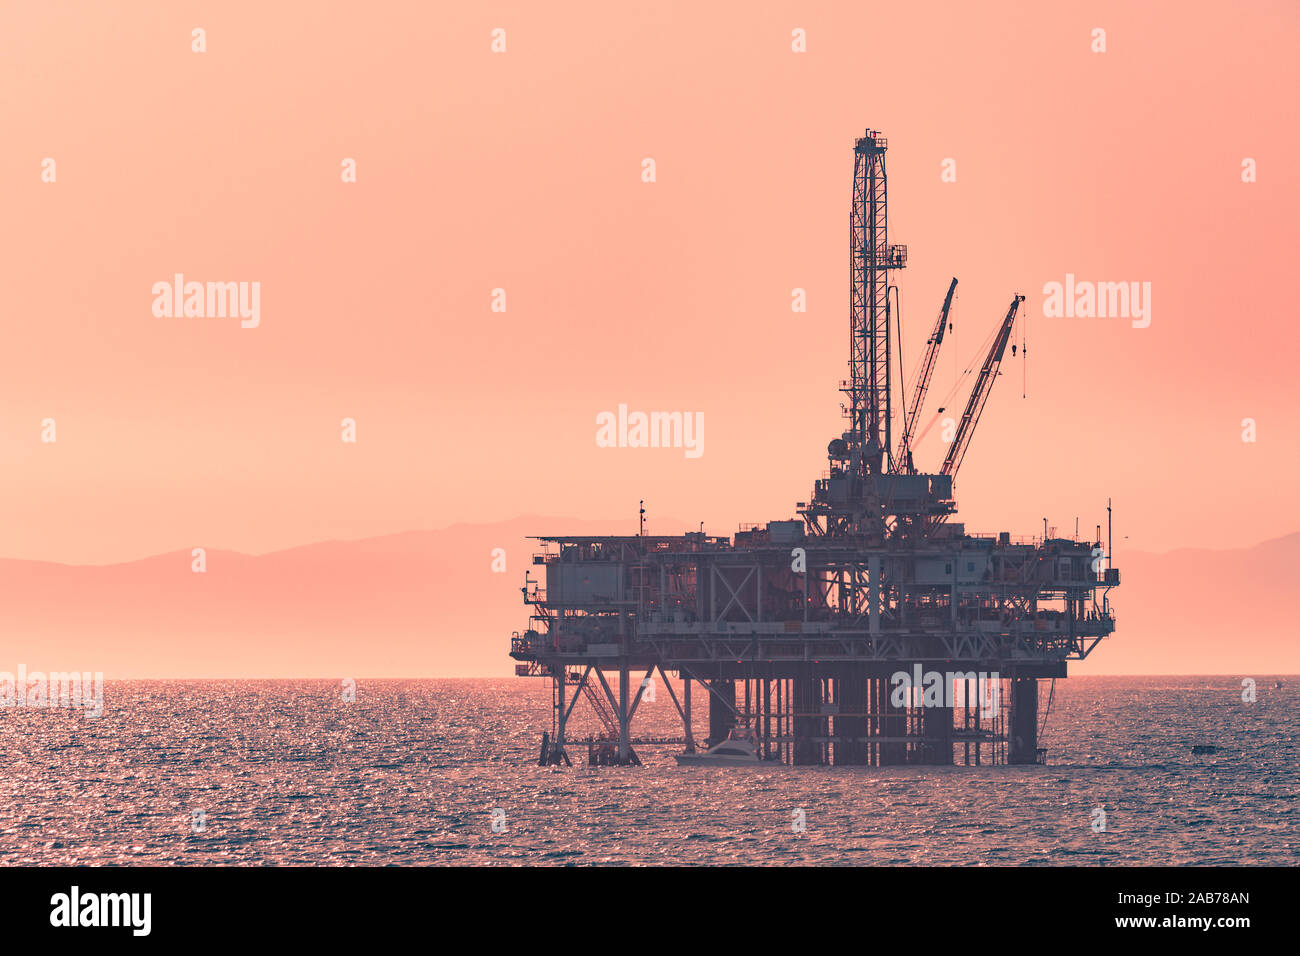 An oil rig far in the distance on the ocean Stock Photo